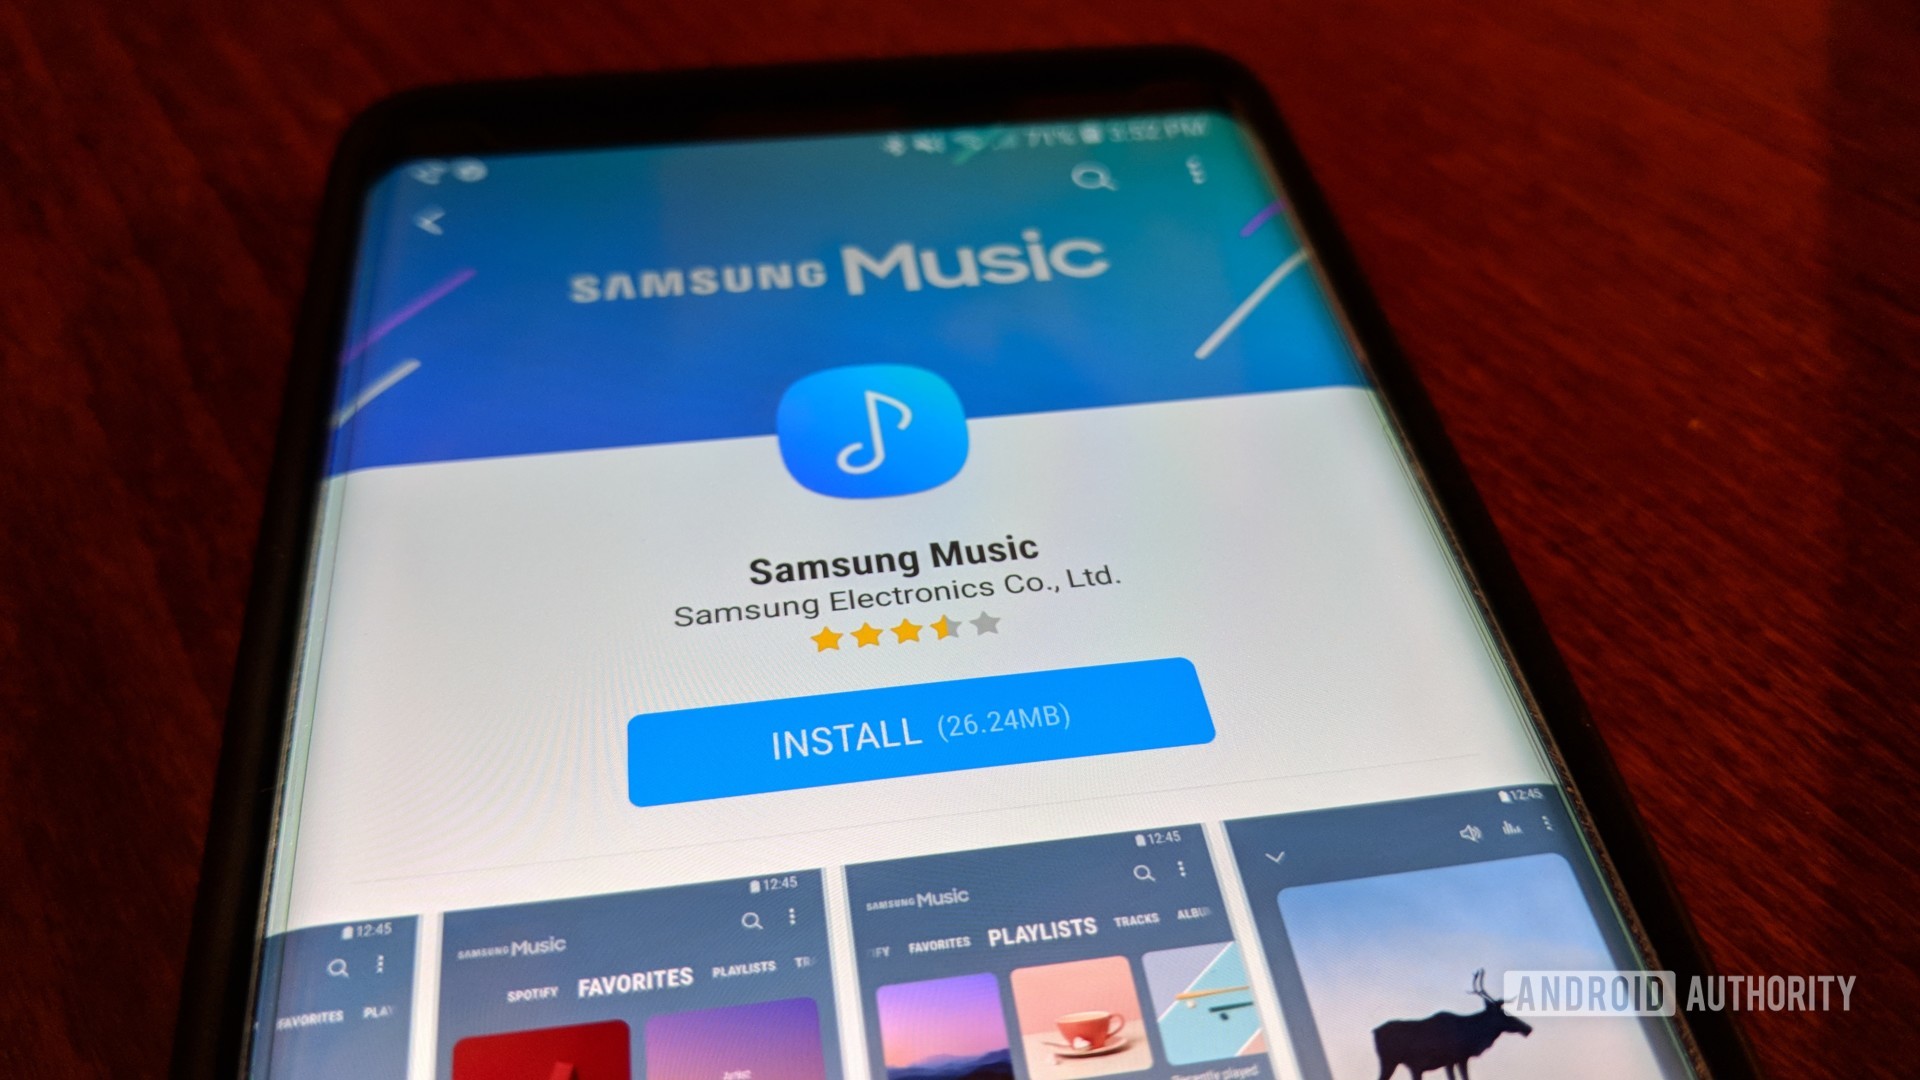 Can You Listen To Spotify Playlist On Samsung Music App